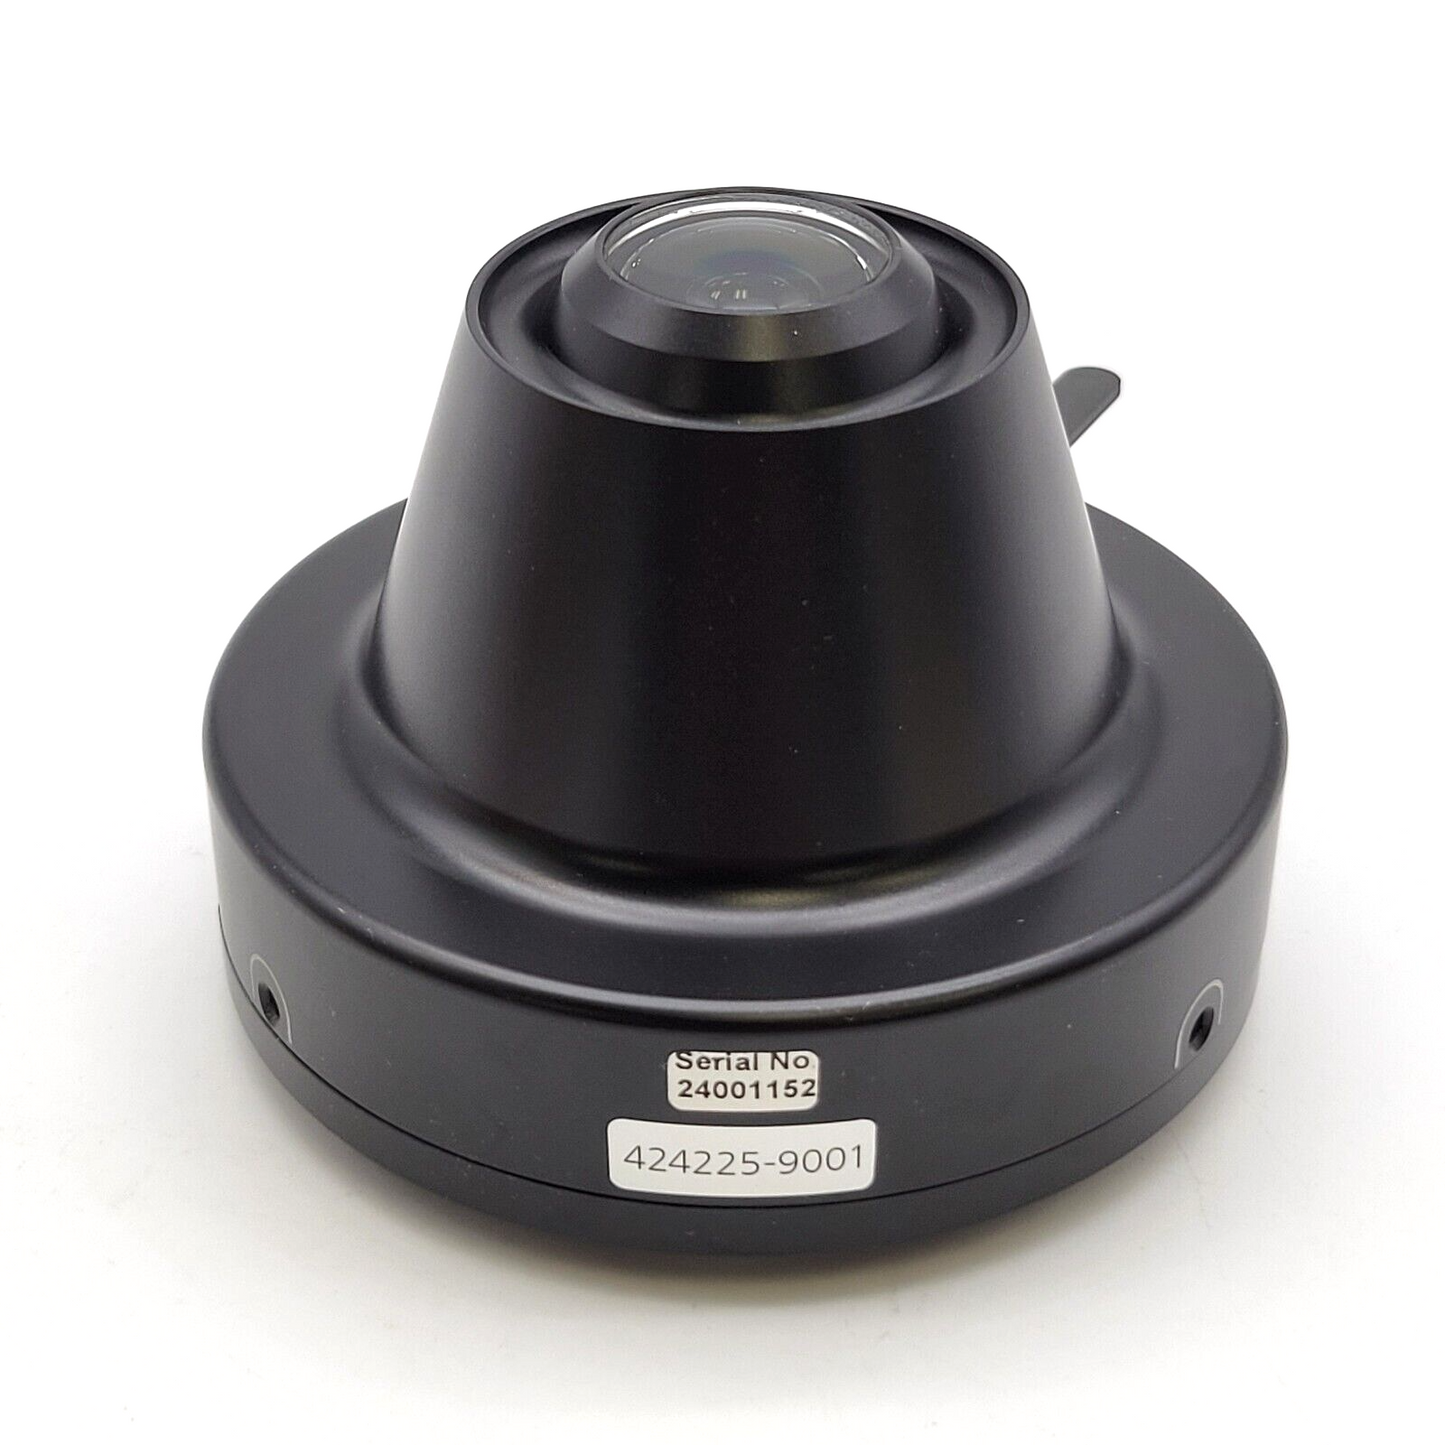 Zeiss Microscope Condenser 0.9/1.25 H 424225-9001 for Axioscope - microscopemarketplace